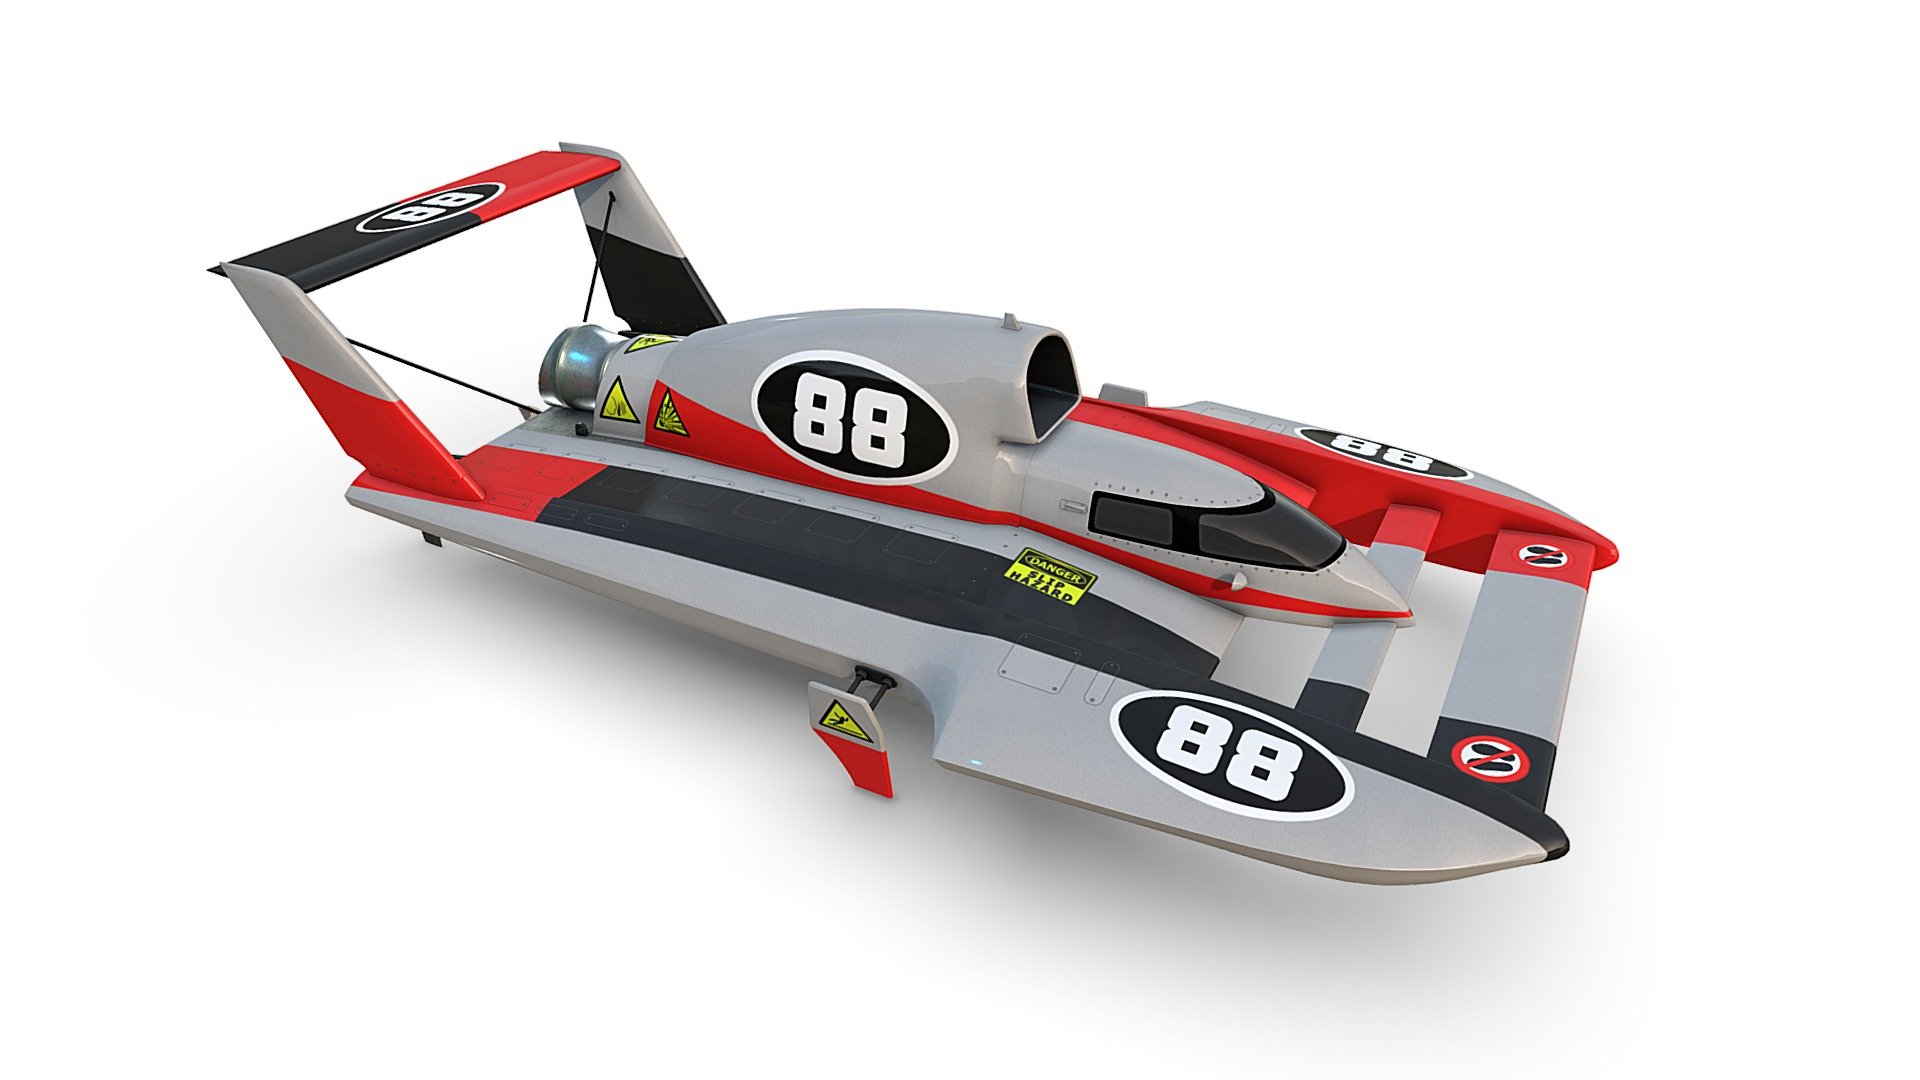 Hydroplane Racing Boat 88

Additional file contains: 19 x textures in native 4K for both PBR workflows: 2 x base albedo and 2 x base diffuse (versions with and without numbers and labels), 1 x AO, 1 x roughness, 1 x metalness, 1 x specular albedo, 1 x specular diffuse, 1 x gloss, 1 x bump, 4 x norm DX and 4 x norm GL (with 4 x different normal map  intensities per DX and GL dependent on your shader and ingame lighting). Contained are also the file formats .fbx, .obj, .dae, .3ds, .blend and .max (native 2014) 3d model